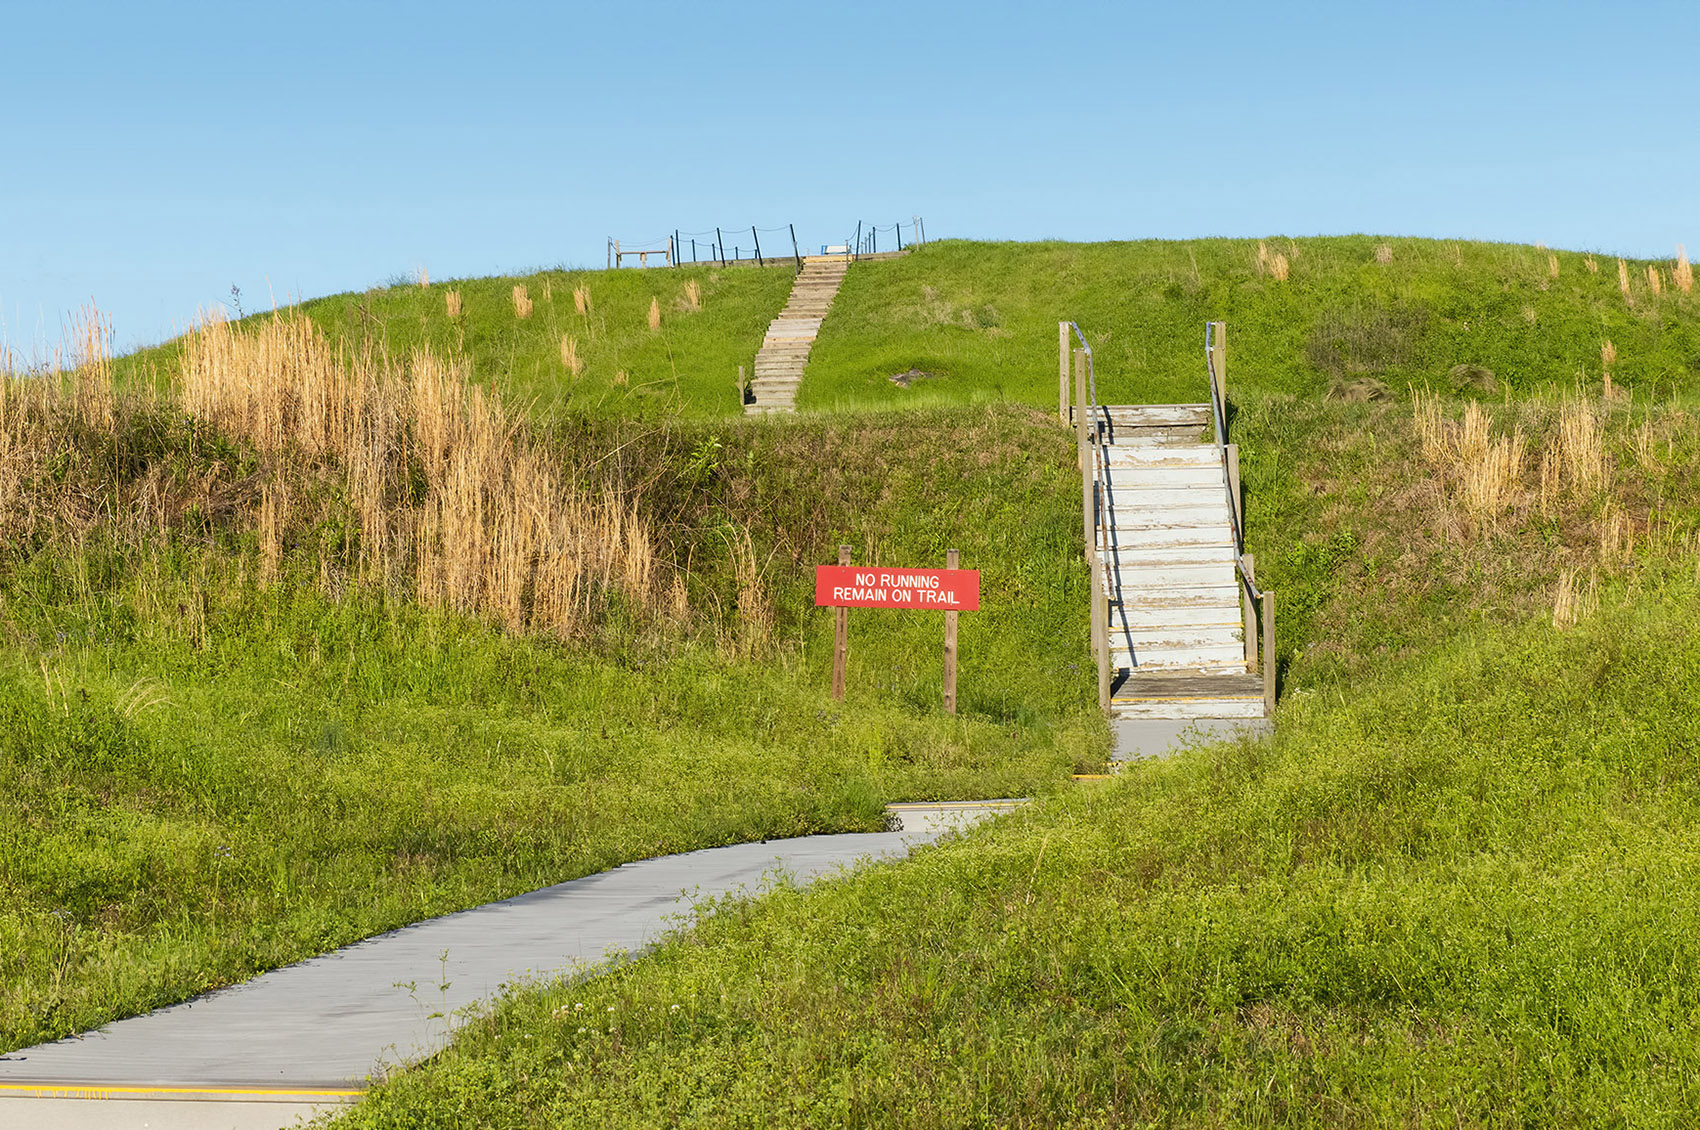 Poverty Point mounds in Louisiana